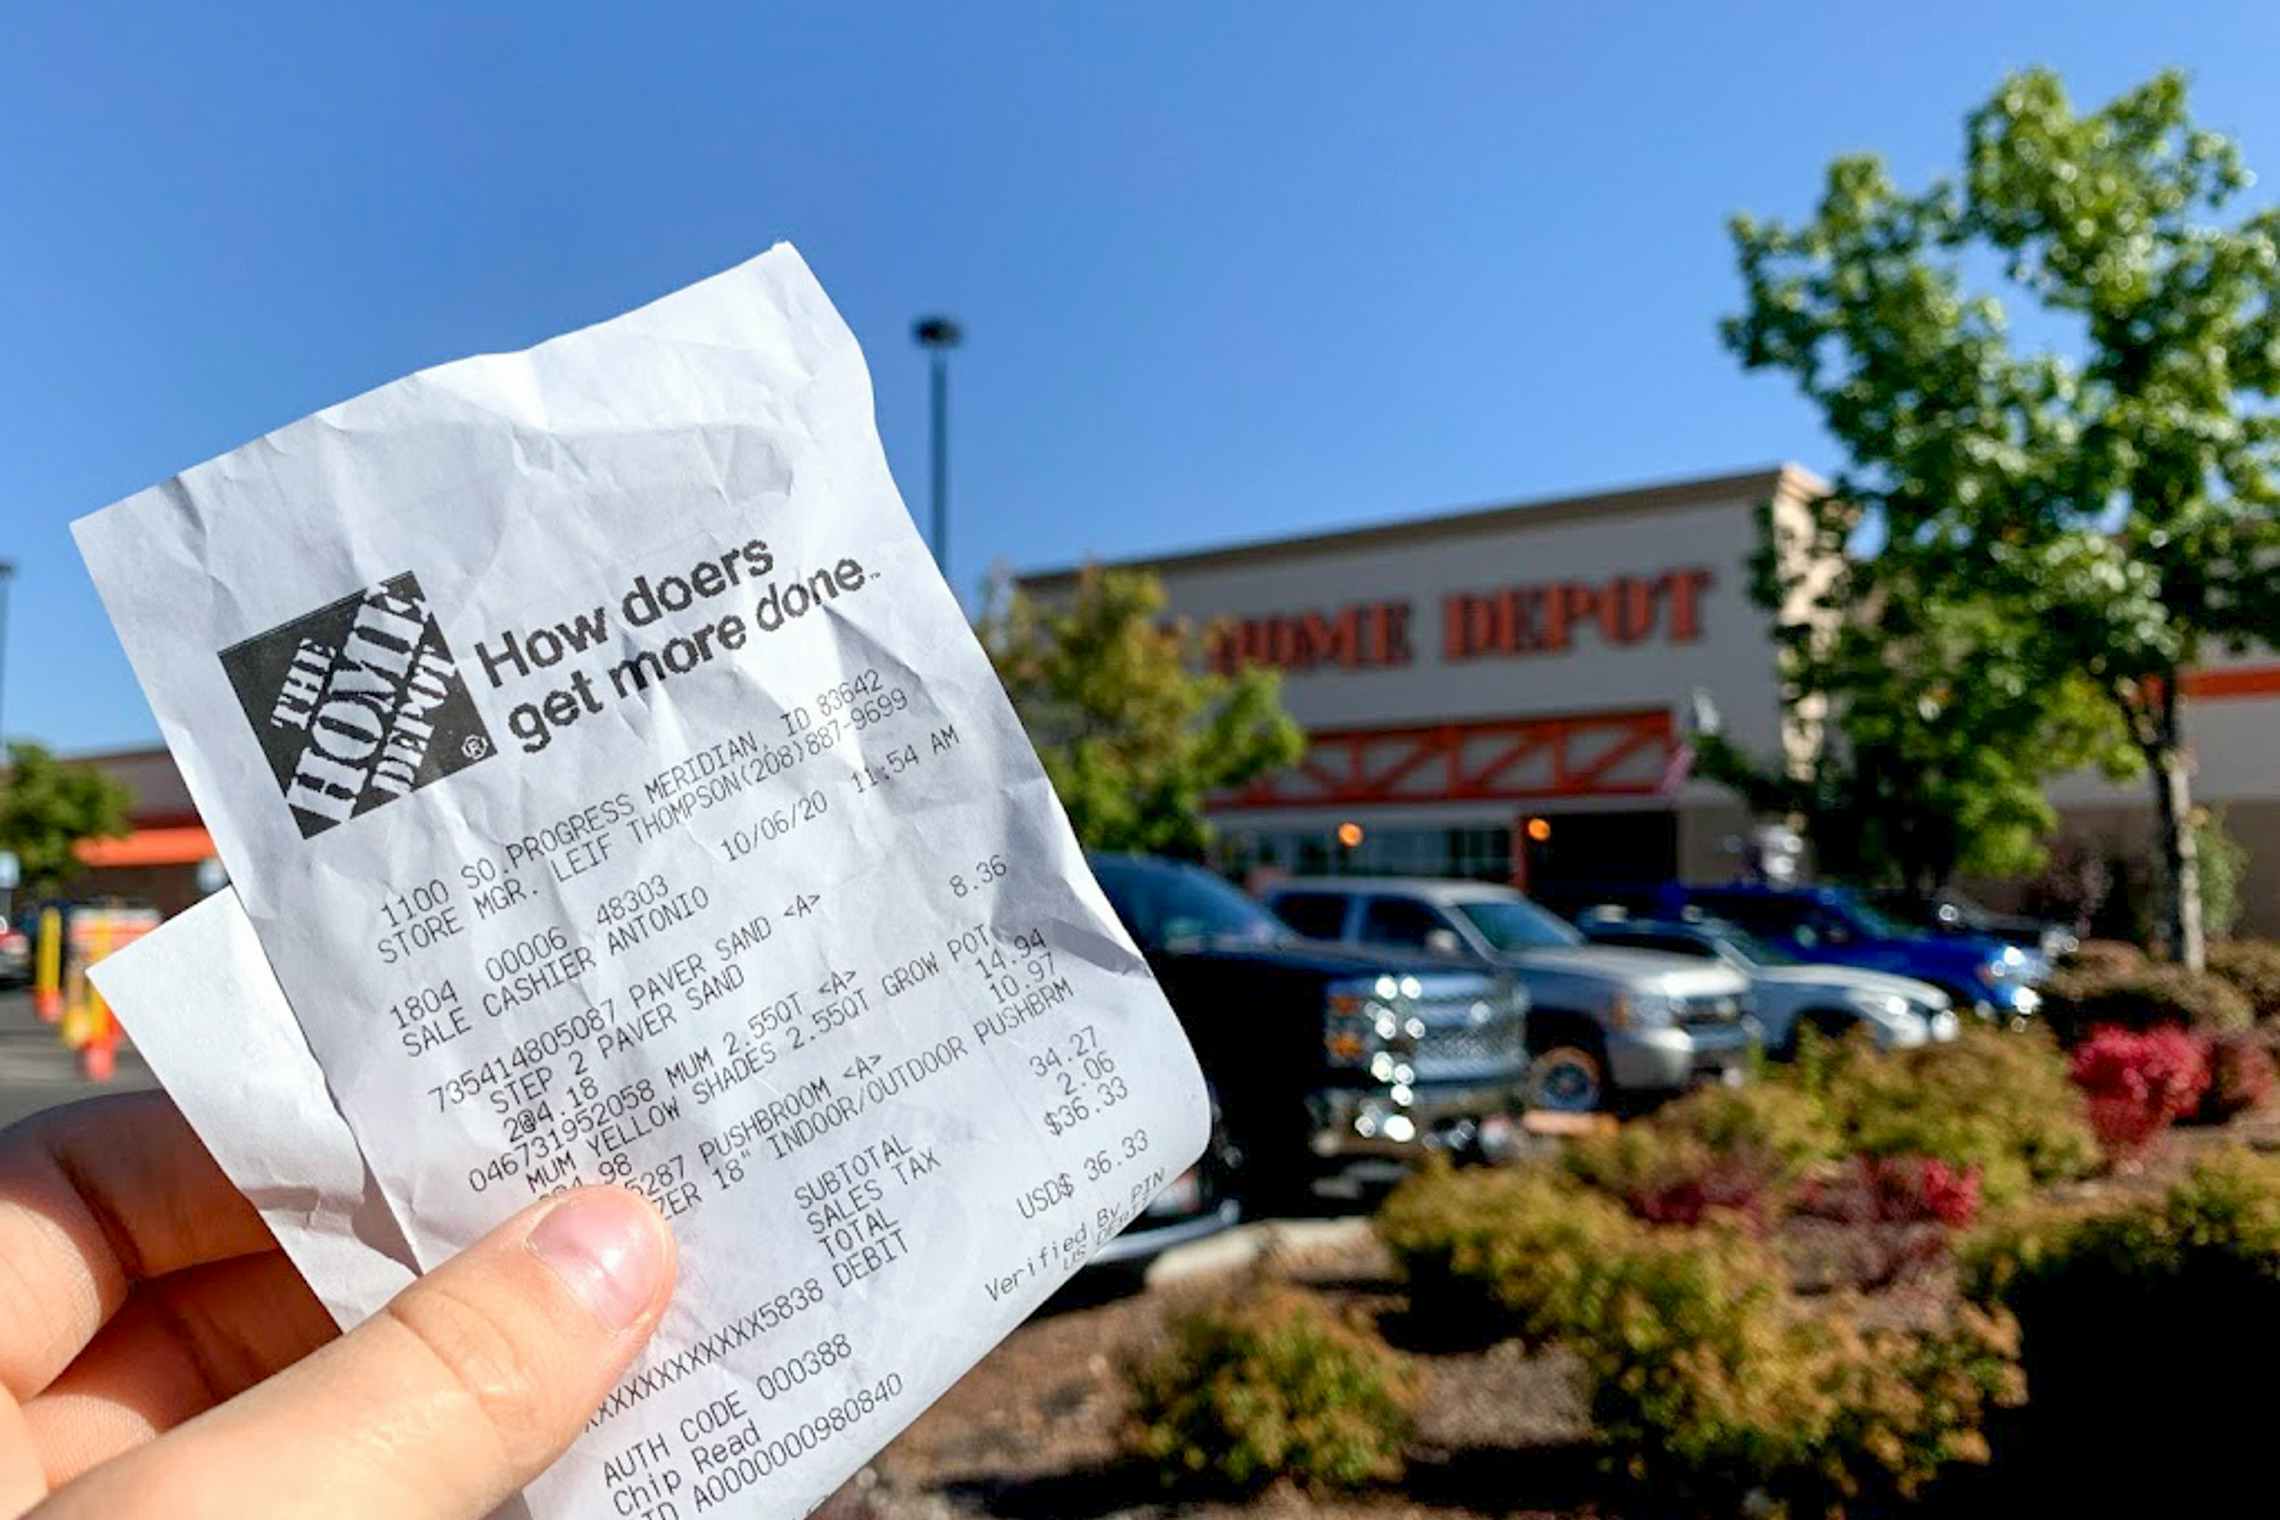 Someone holding up their Home Depot receipt in front of a Home Depot store.